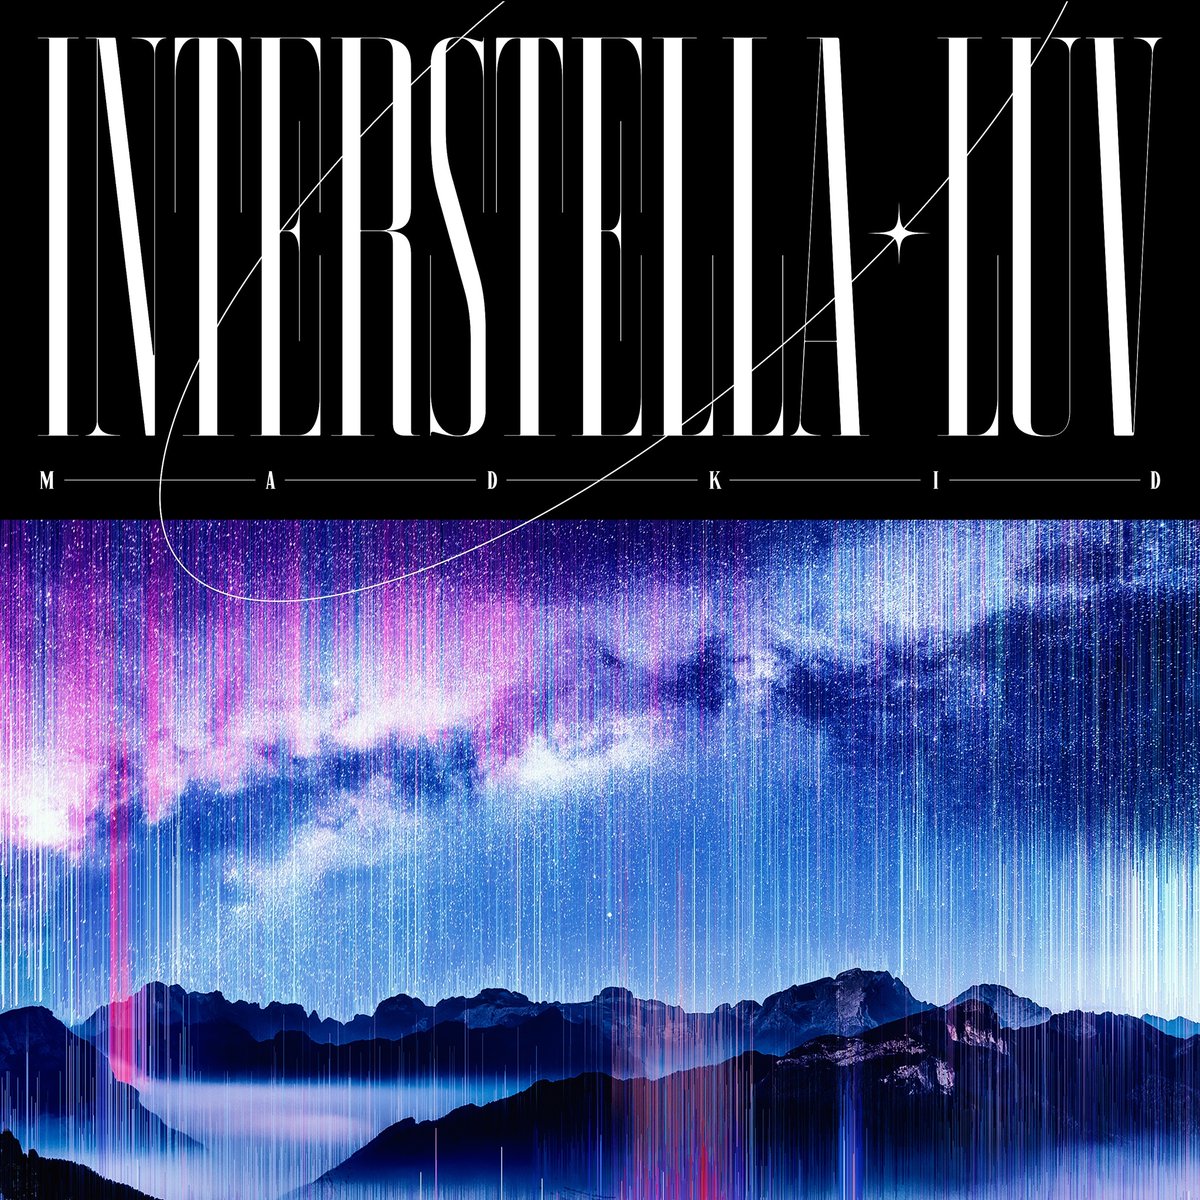 Cover for『MADKID - Interstella Luv』from the release『Interstella Luv』